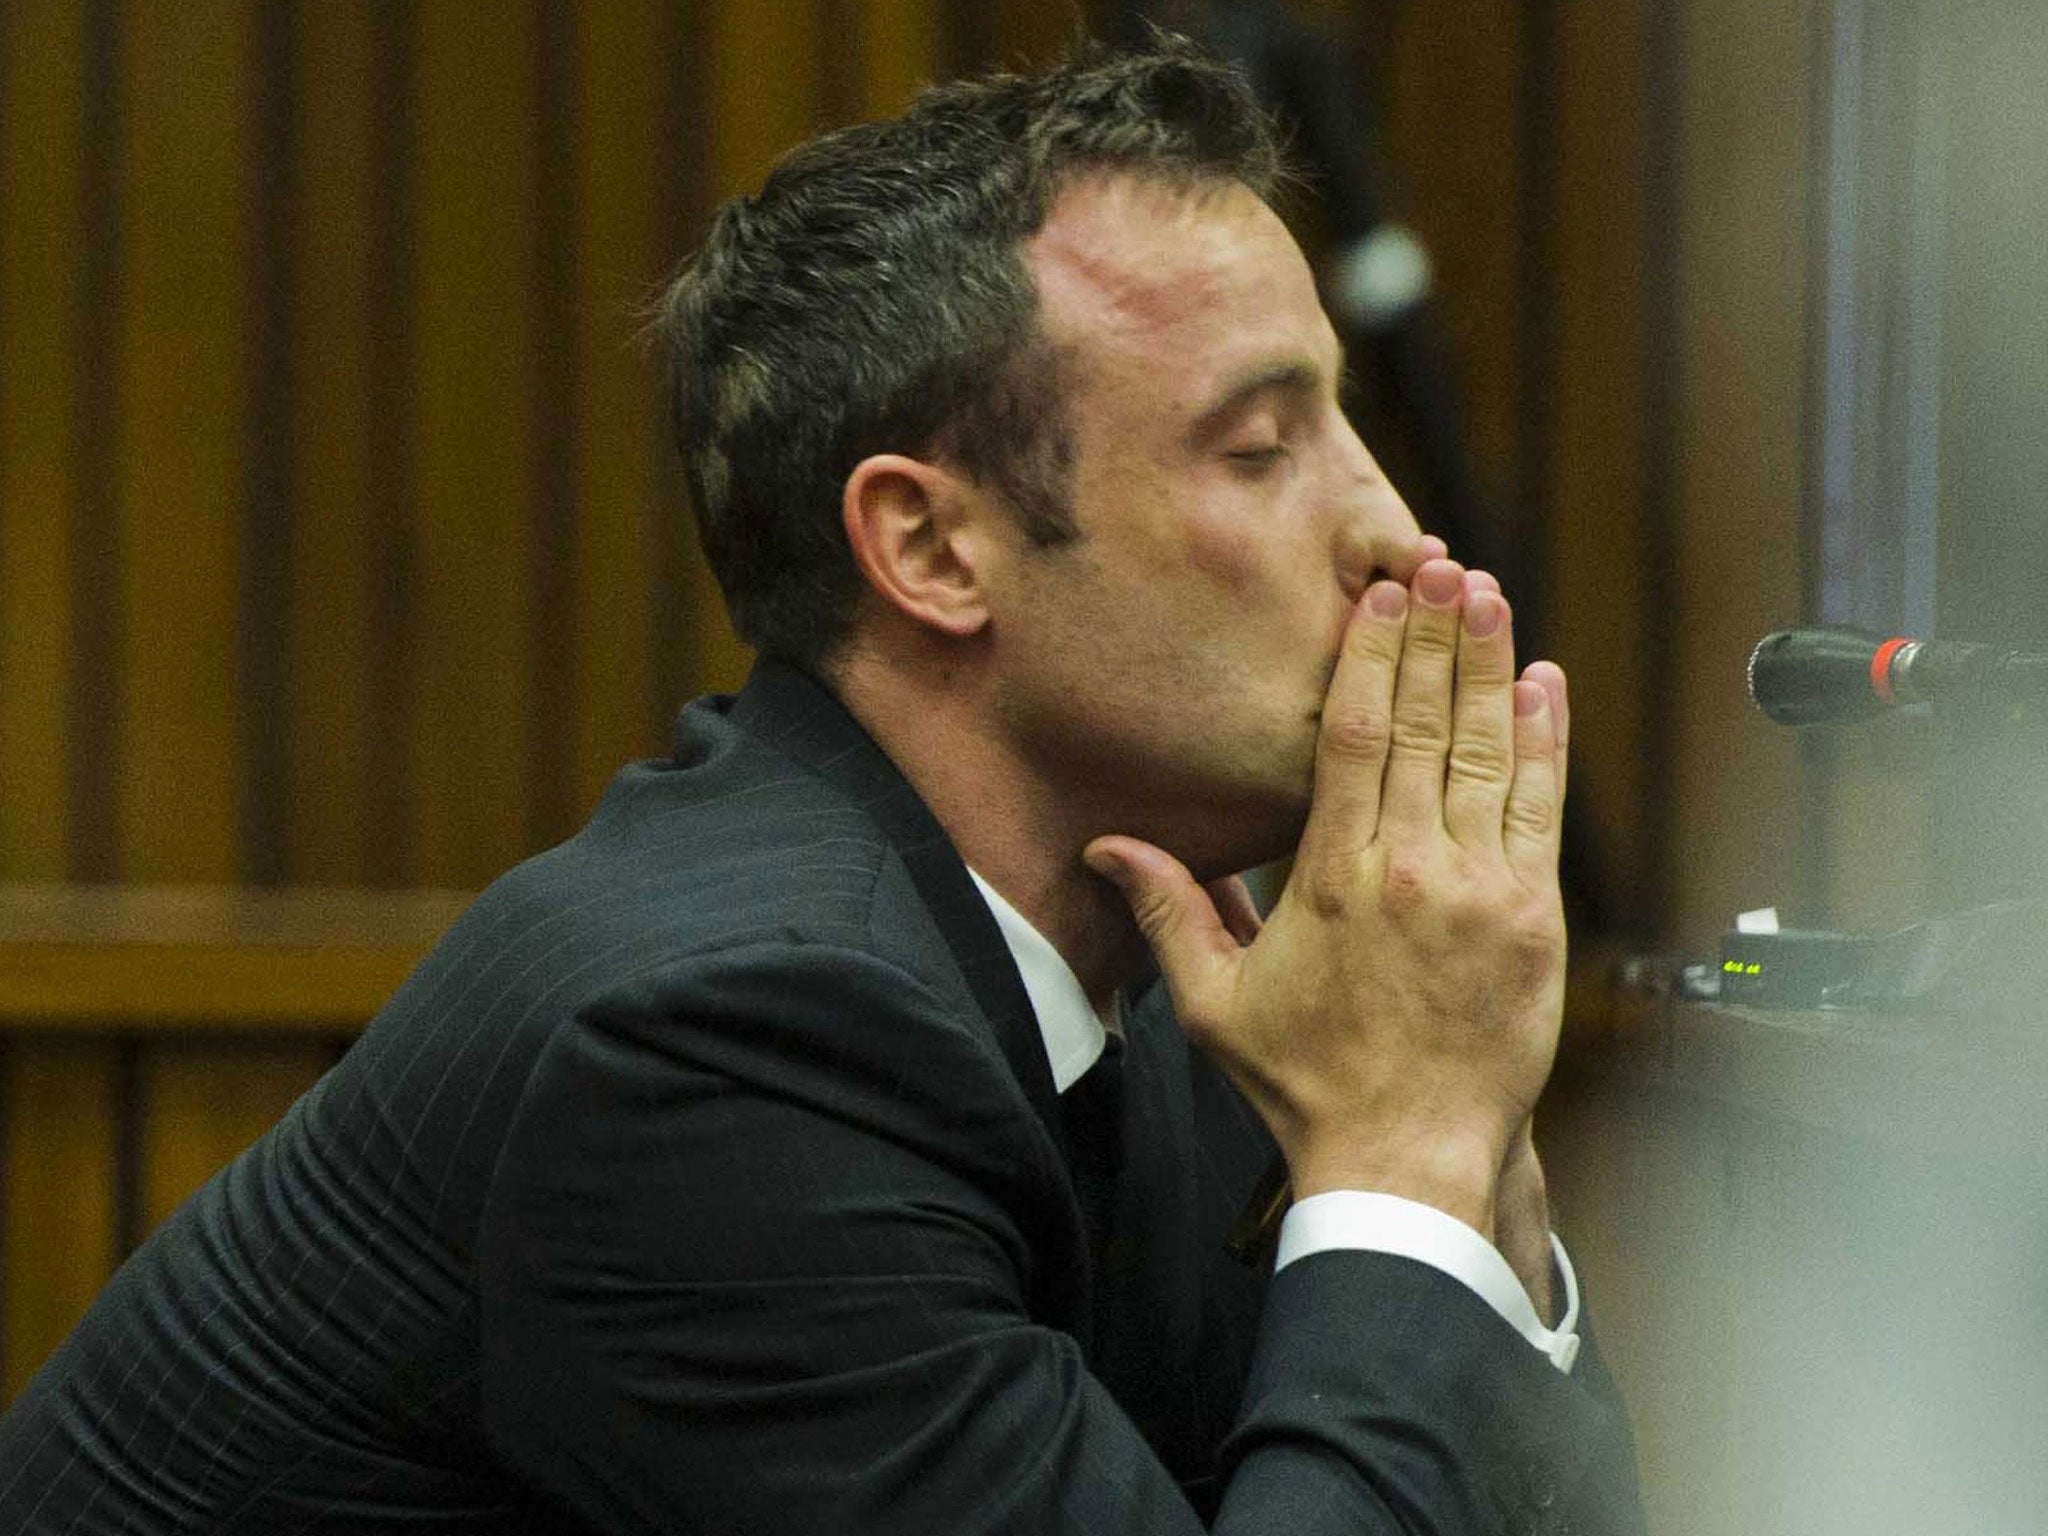 Oscar Pistorius sits in the dock during his murder trial at the North Gauteng High Court in Pretoria